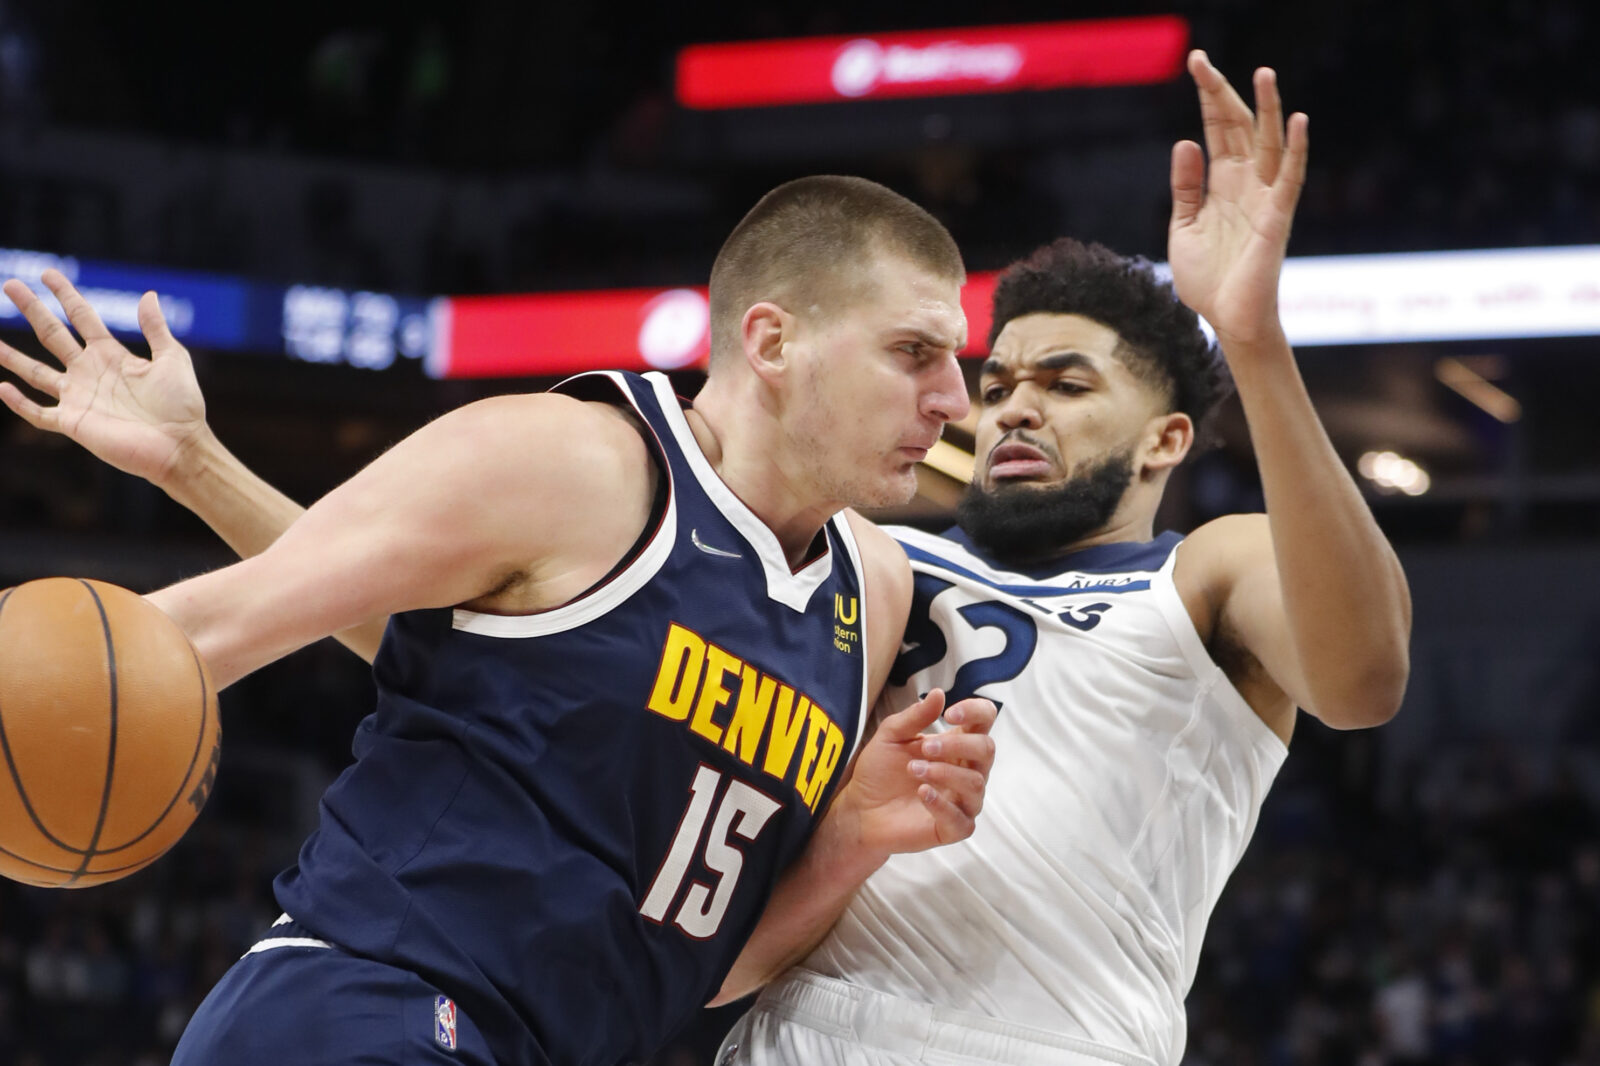 Denver Nuggets will face Minnesota Timberwolves in the first round of